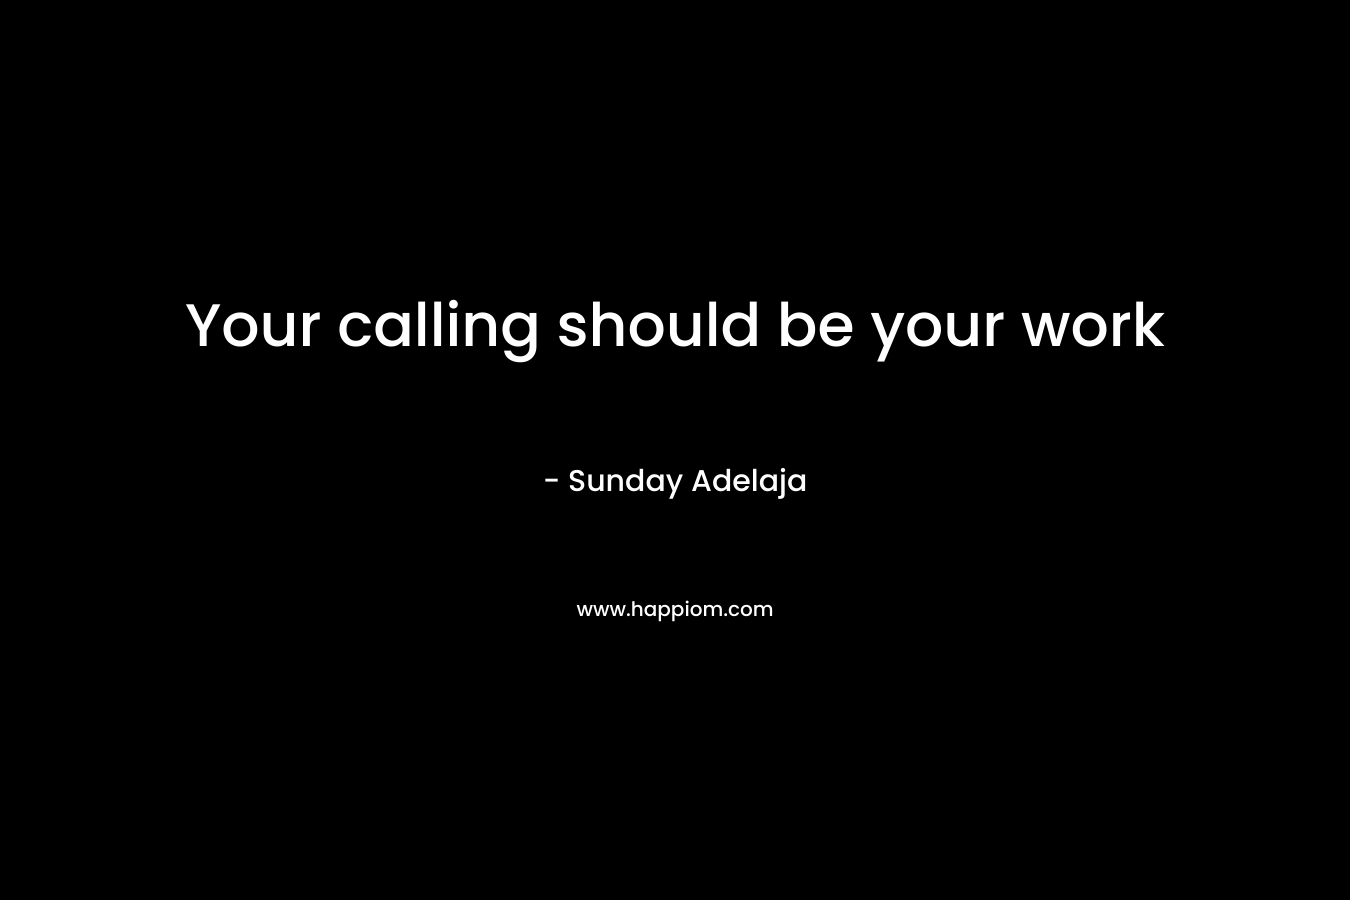 Your calling should be your work